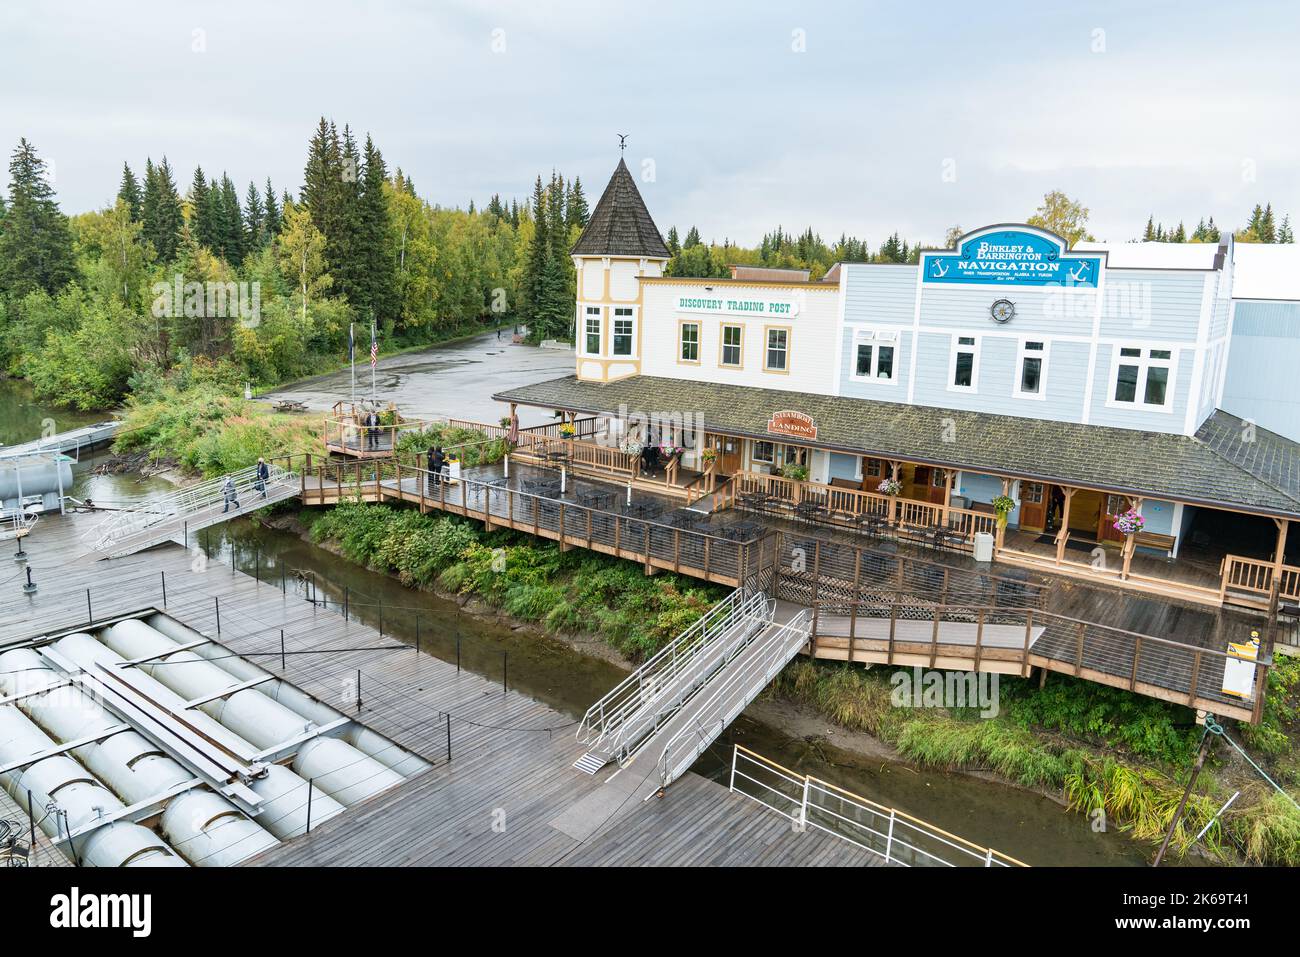 Fairbanks, Alaska - August 27, 2022: Steamboat Landing in Fairbanks, Alaska is home to Riverboat Discovery III.  The landing is owned by the Binkley f Stock Photo